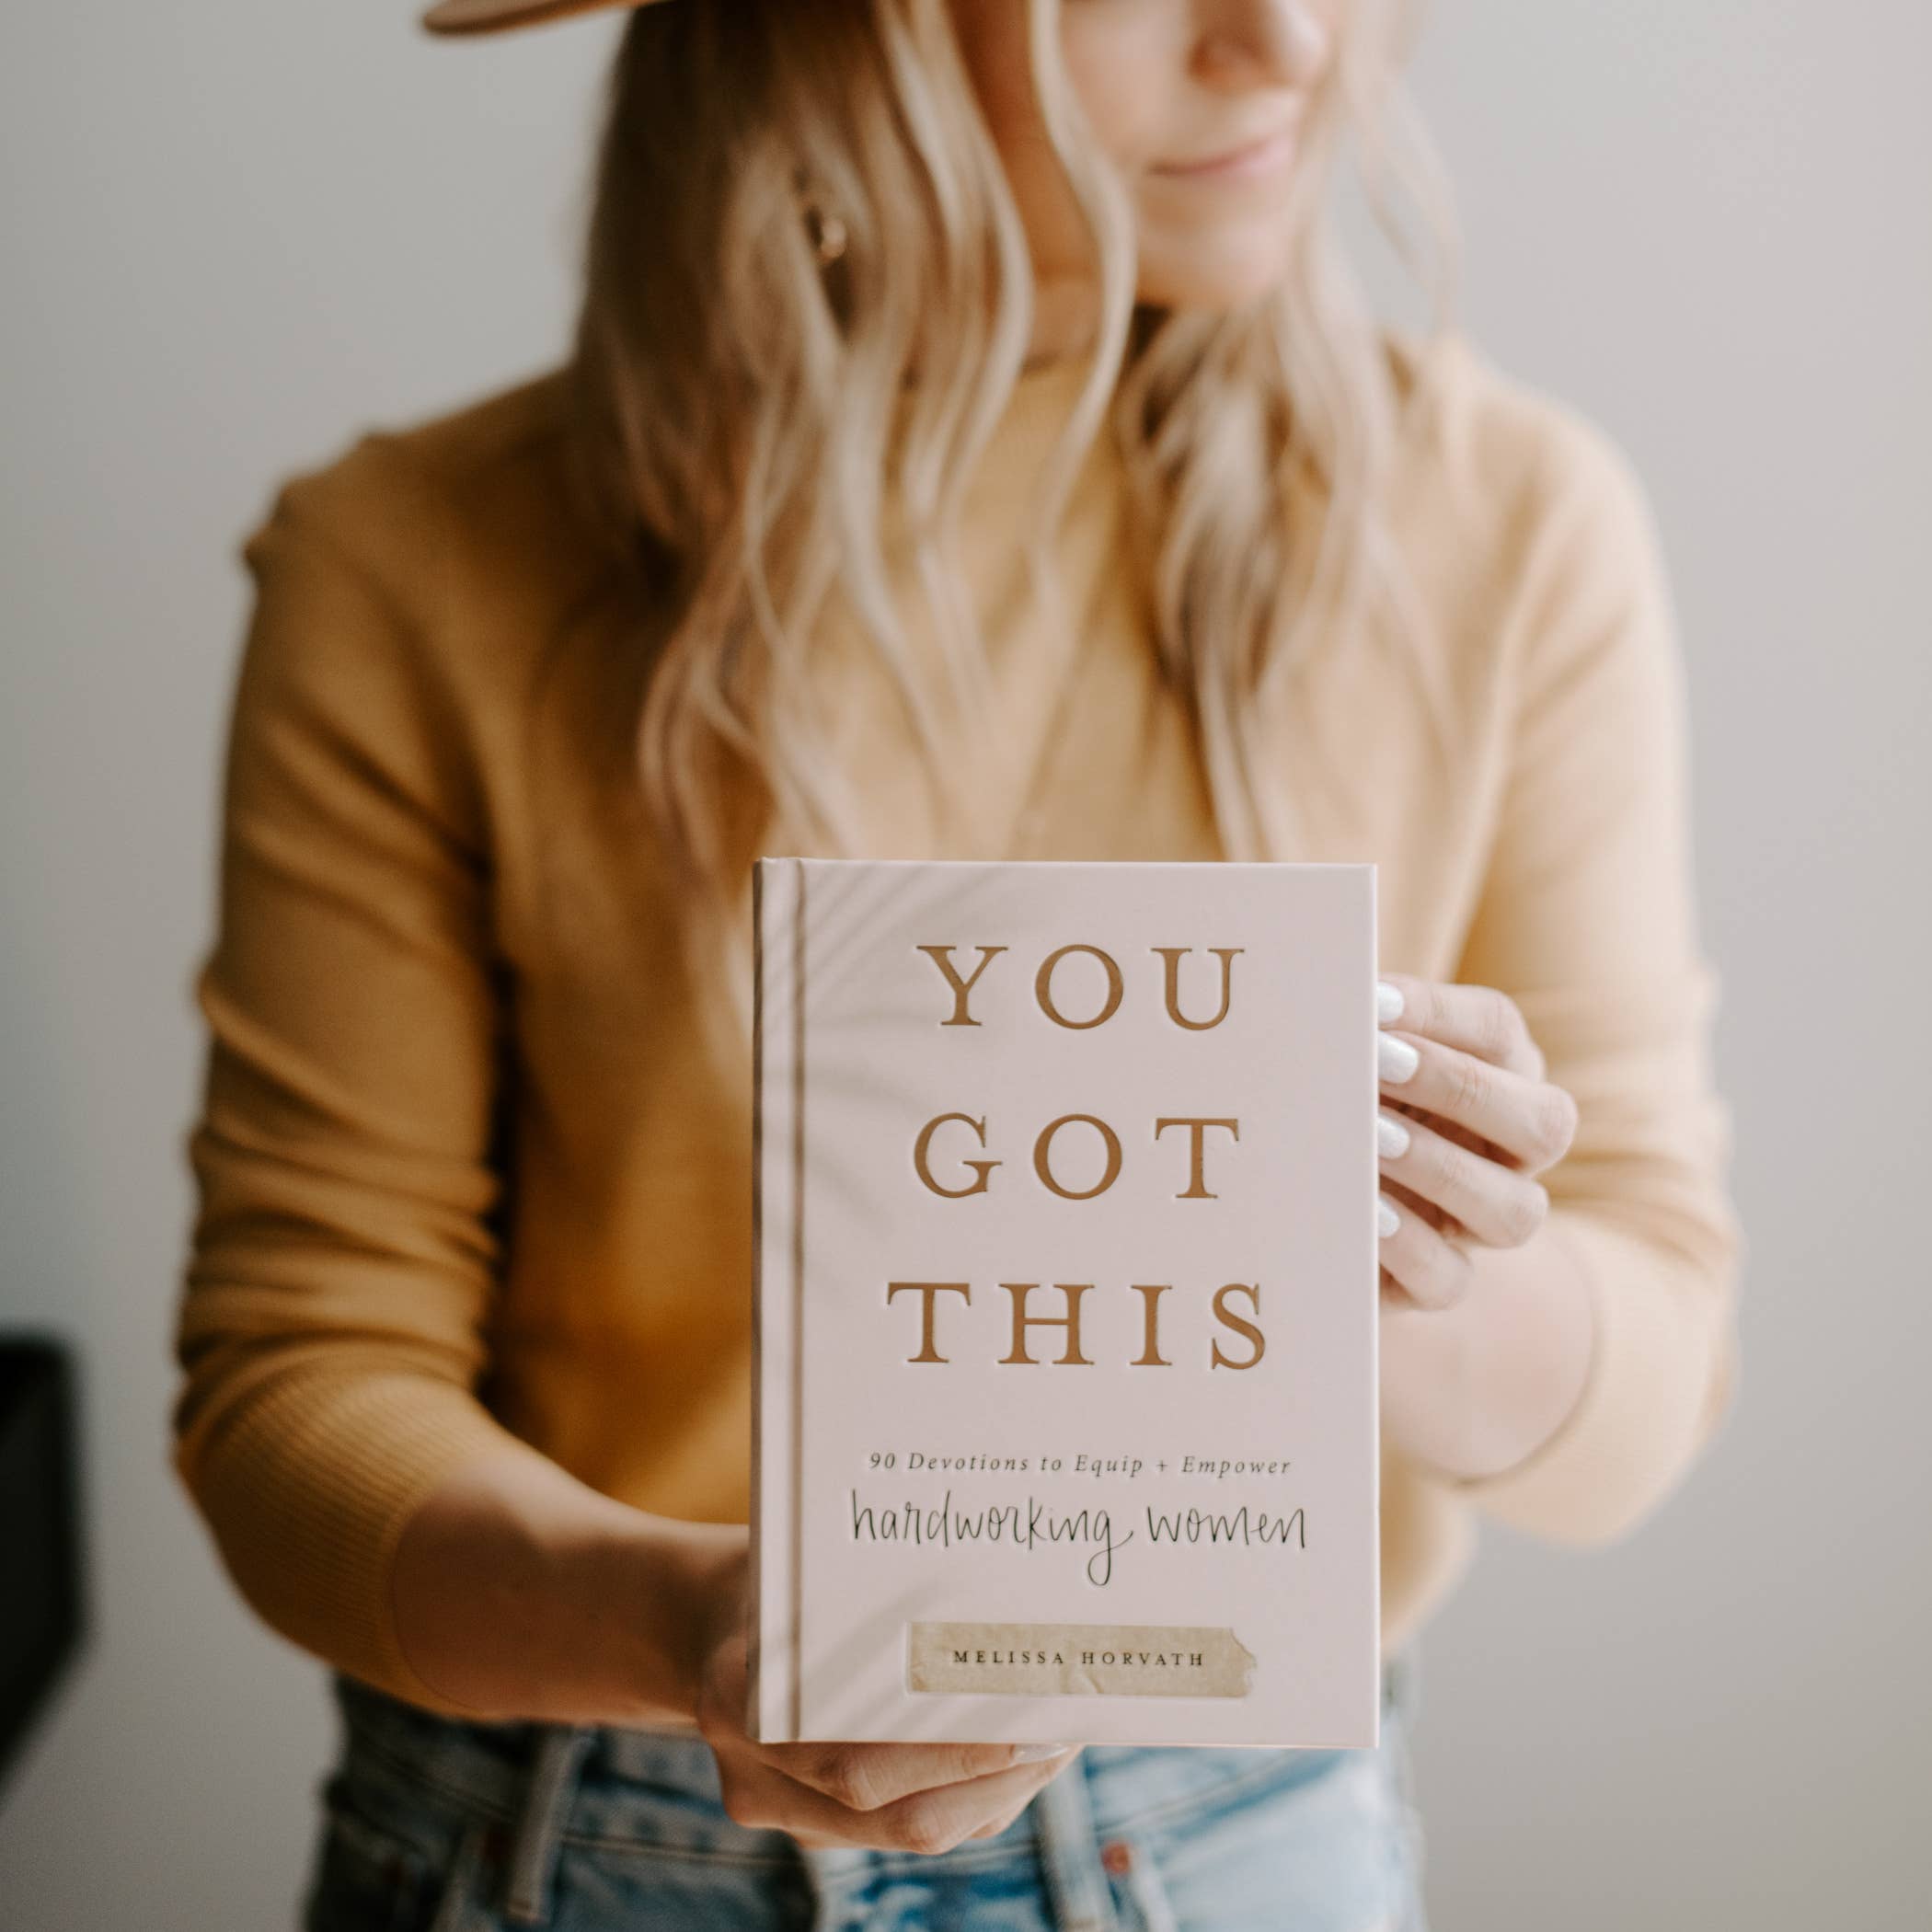 You Got This - 90 Devotions to Empower Hardworking Women